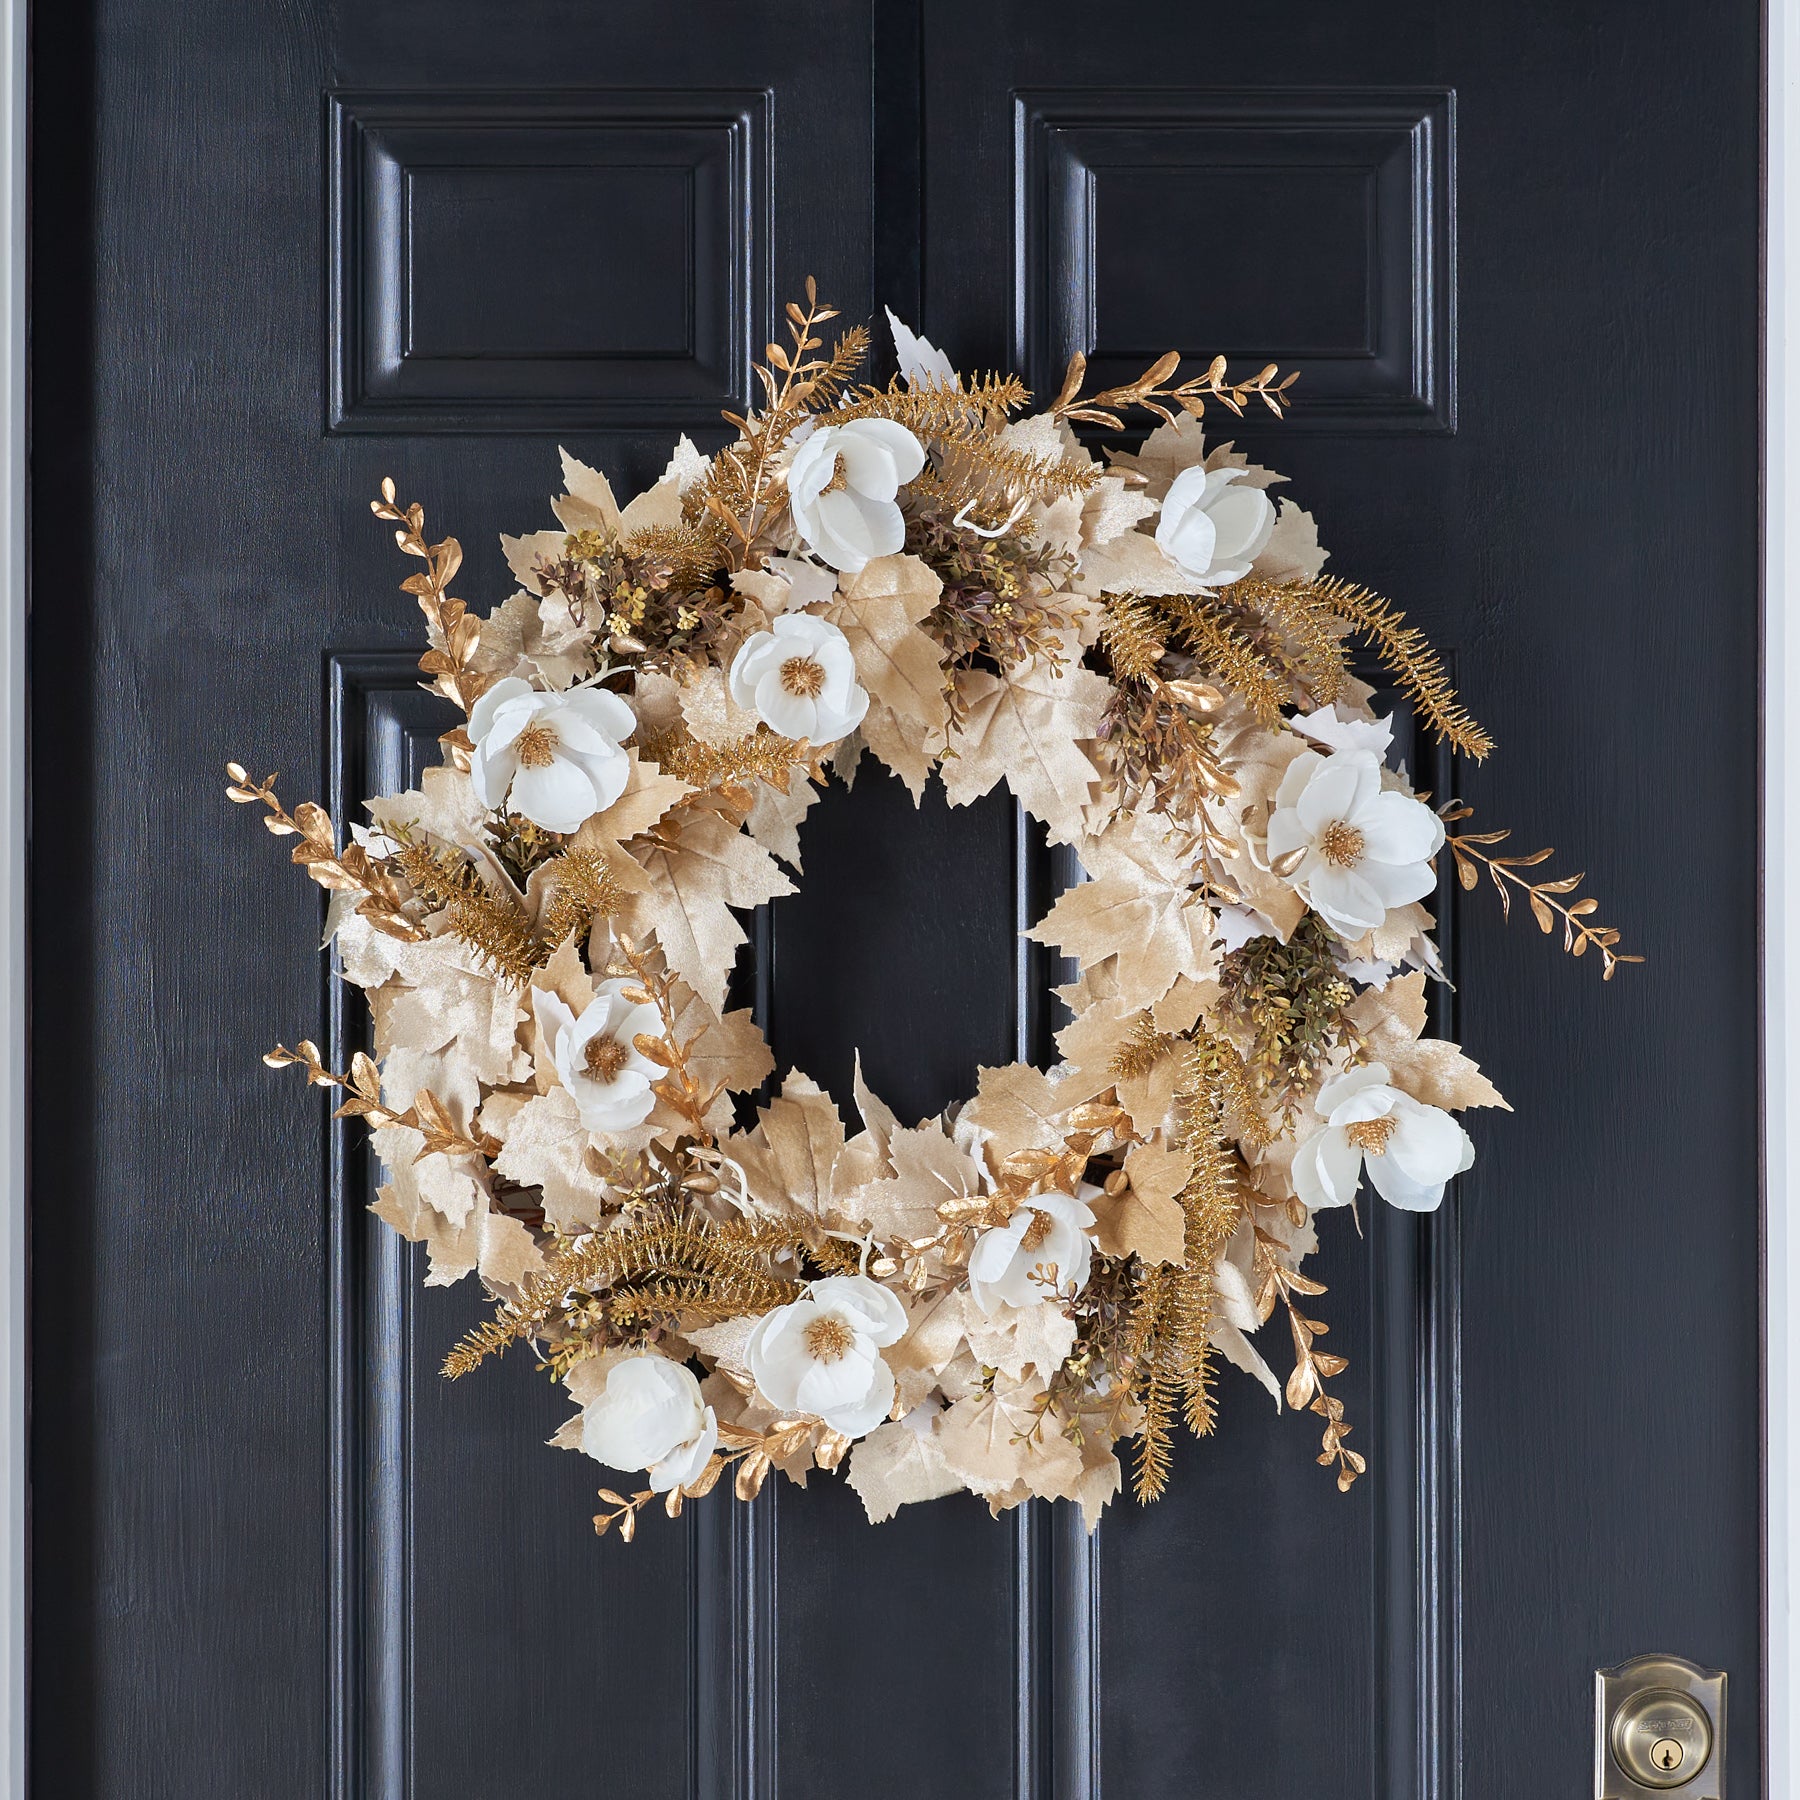 Christmas Wreath | Holiday Artificial Christmas Wreaths – Page 2 ...